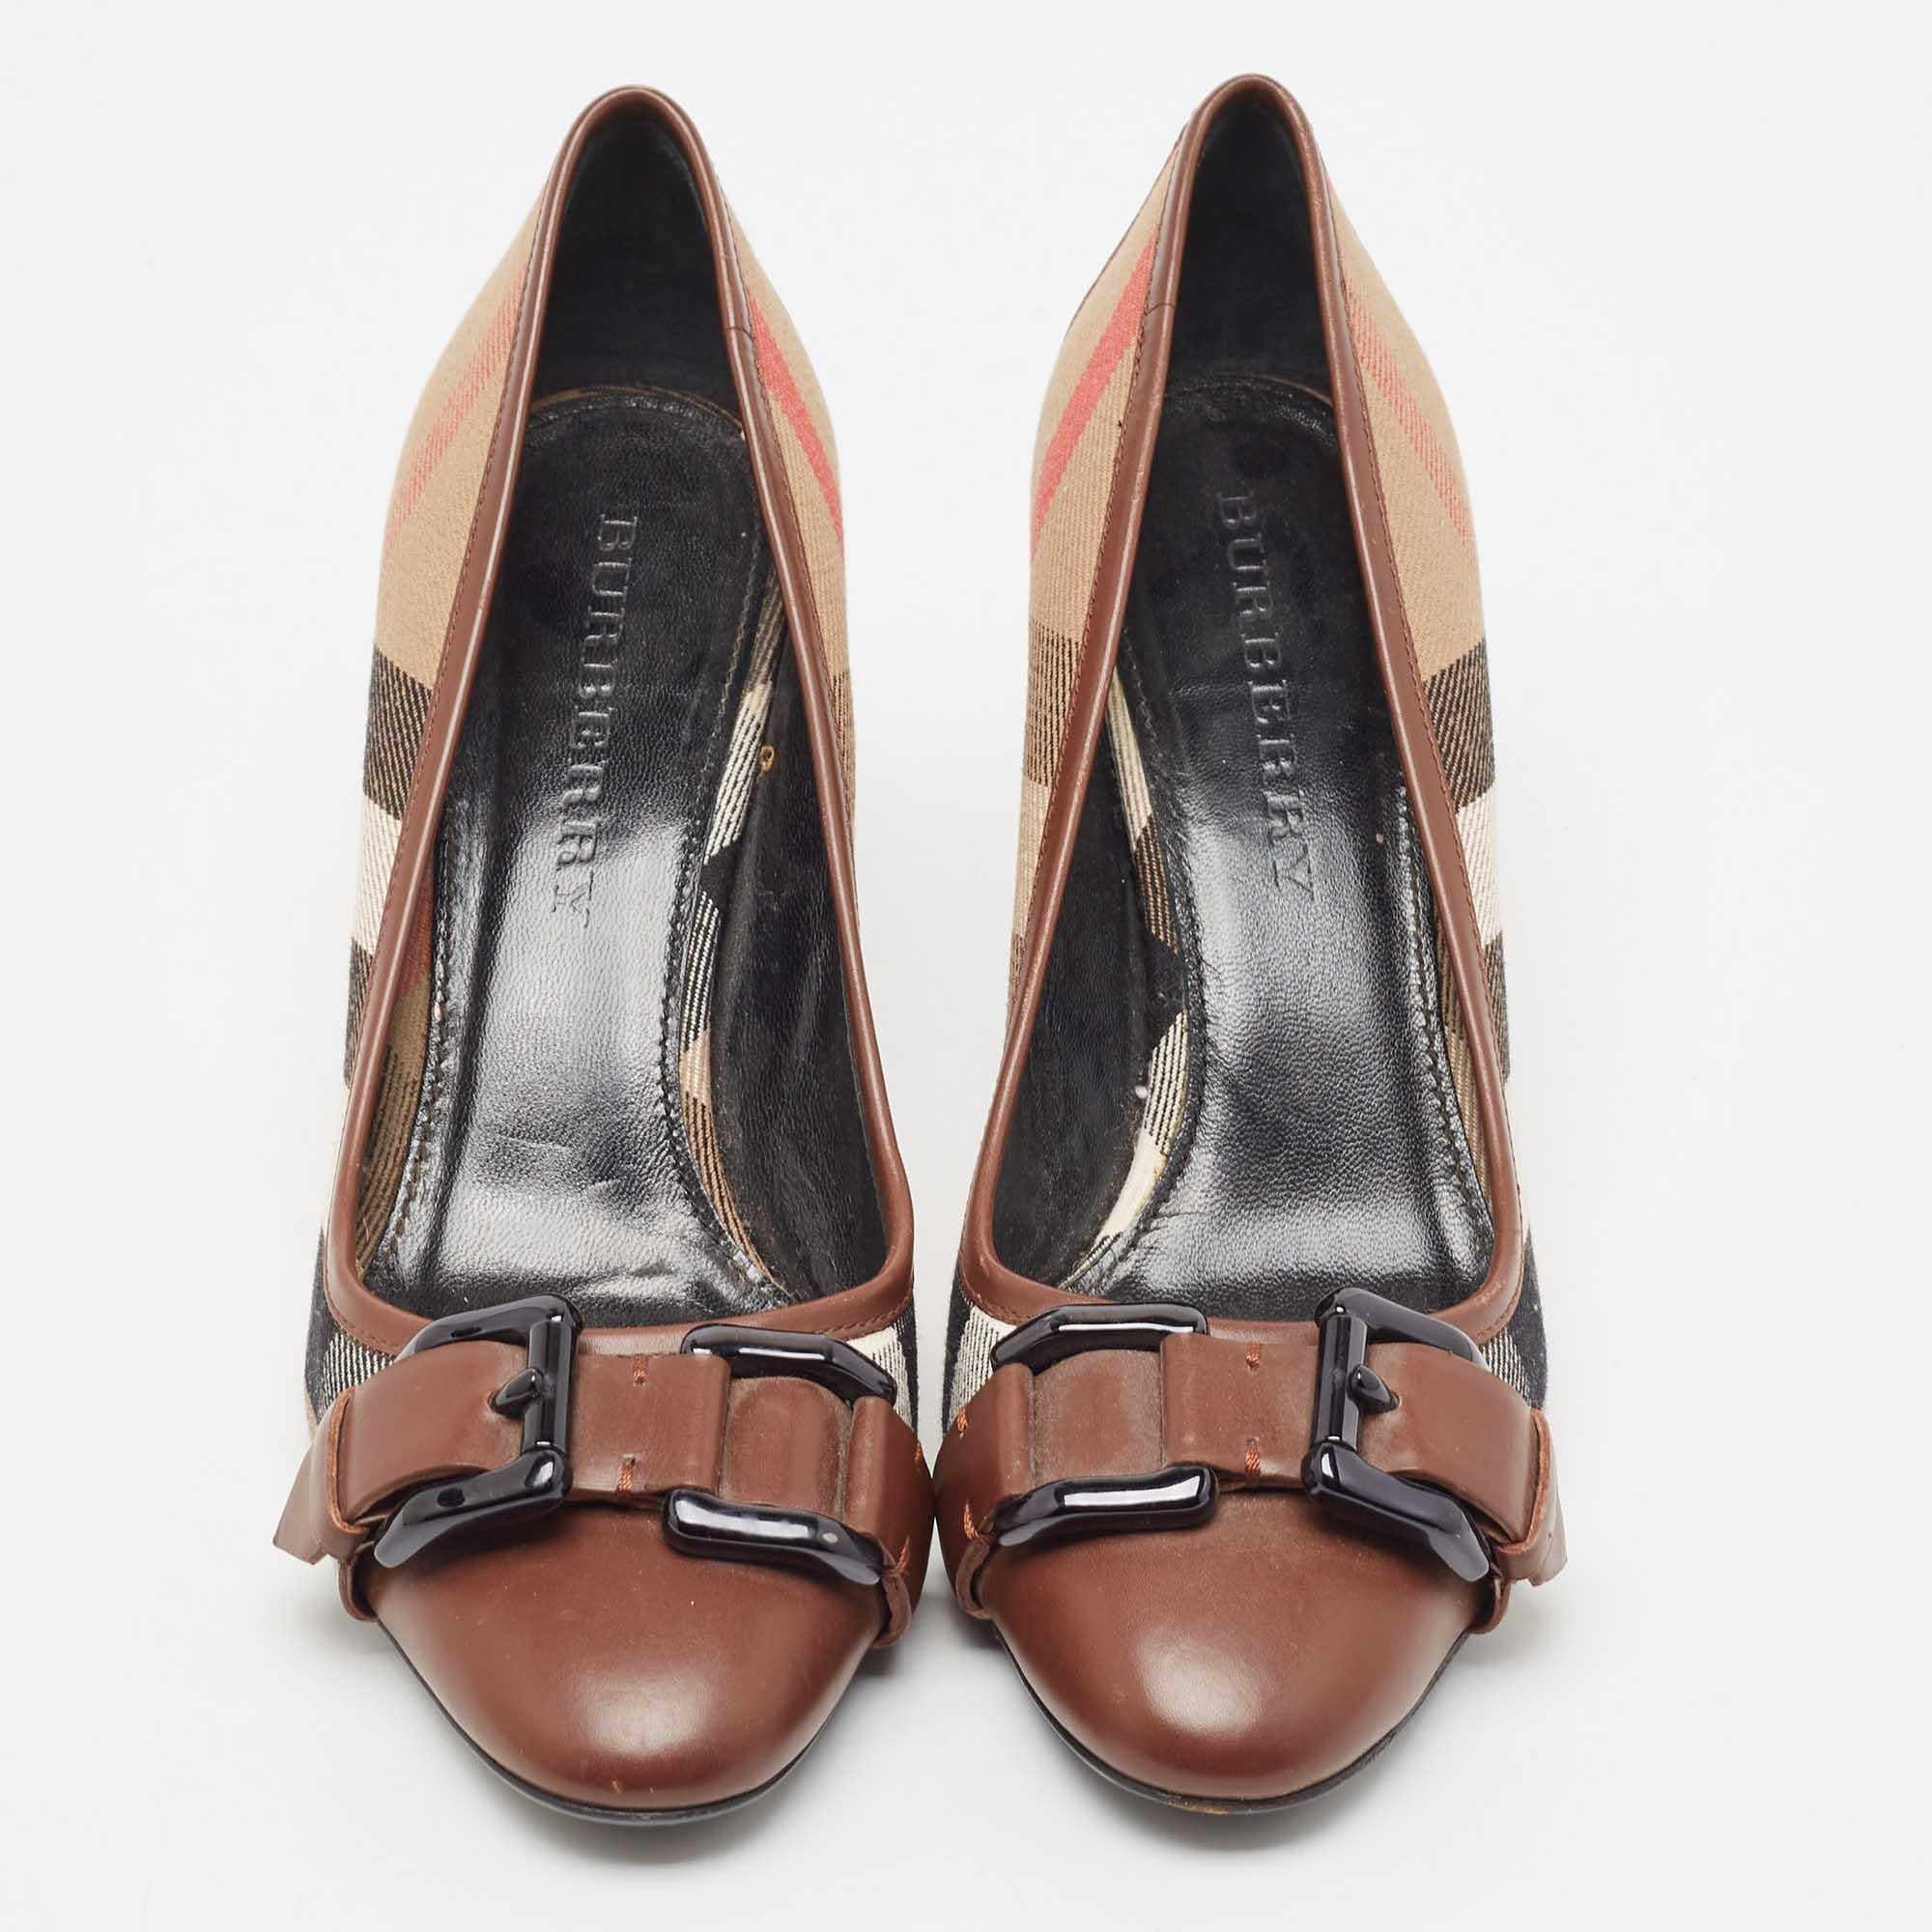 Perfectly sewn and finished to ensure an elegant look and fit, these Burberry shoes are a purchase you'll love flaunting. They look great on the feet.

